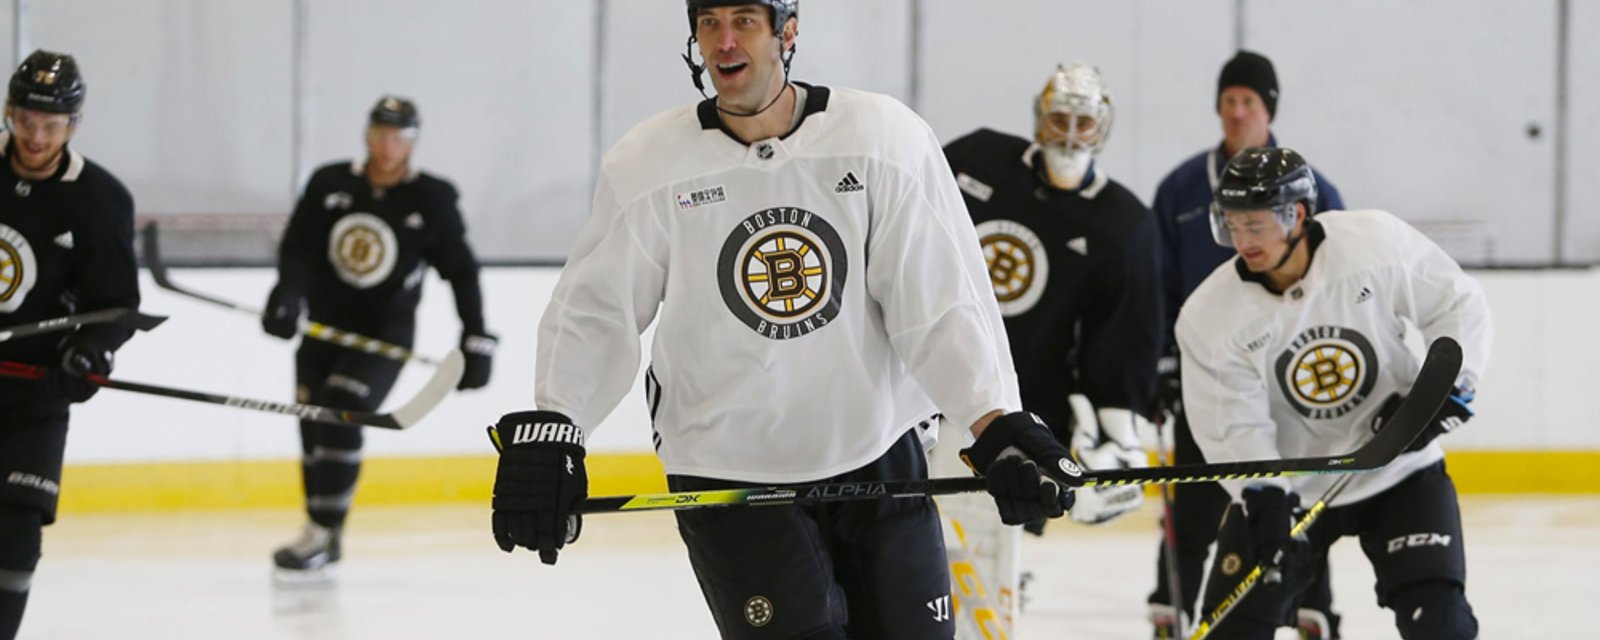 Chara re-joins Bruins, Pastrnak takes responsibility for missing training camp 